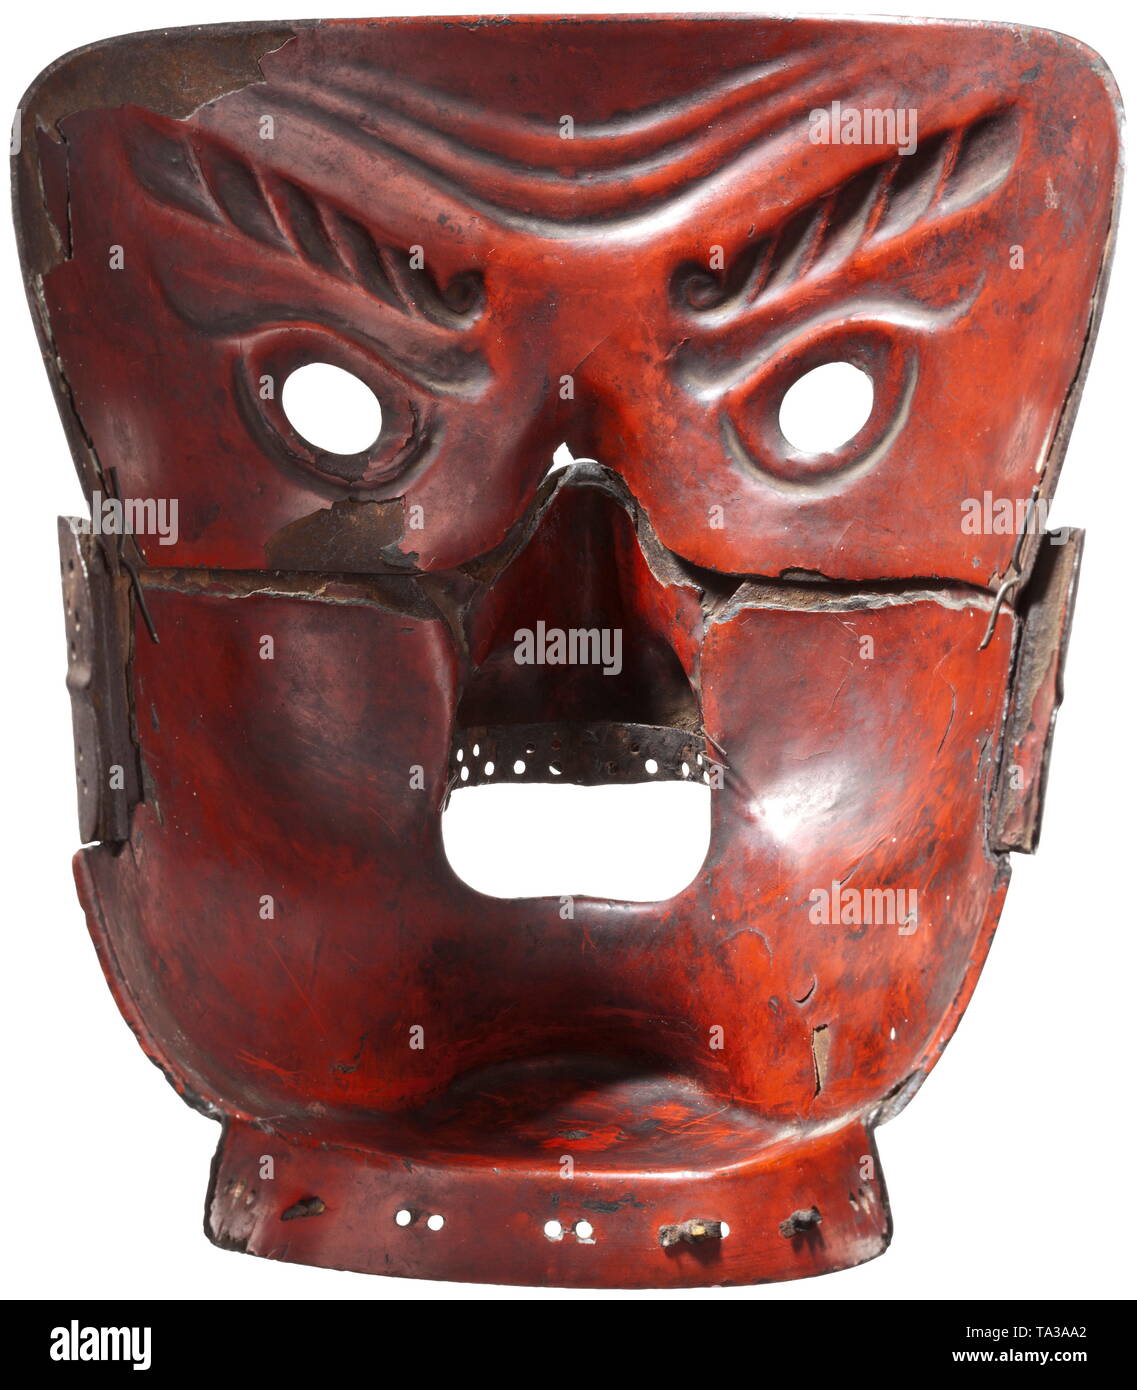 A Japanese somen, mid-Edo and Meiji period Iron, older mempo dating from the Edo period in heavy quality, circa 1750, with a forehead and nose guard added during the Meiji period. Exterior with even patina and partially slightly rubbed, the interior with damaged red lacquer. Height 22 cm. historic, historical, Japanese, Asian, Asia, Far East, object, objects, stills, clipping, clippings, cut out, cut-out, cut-outs, 18th century, Additional-Rights-Clearance-Info-Not-Available Stock Photo